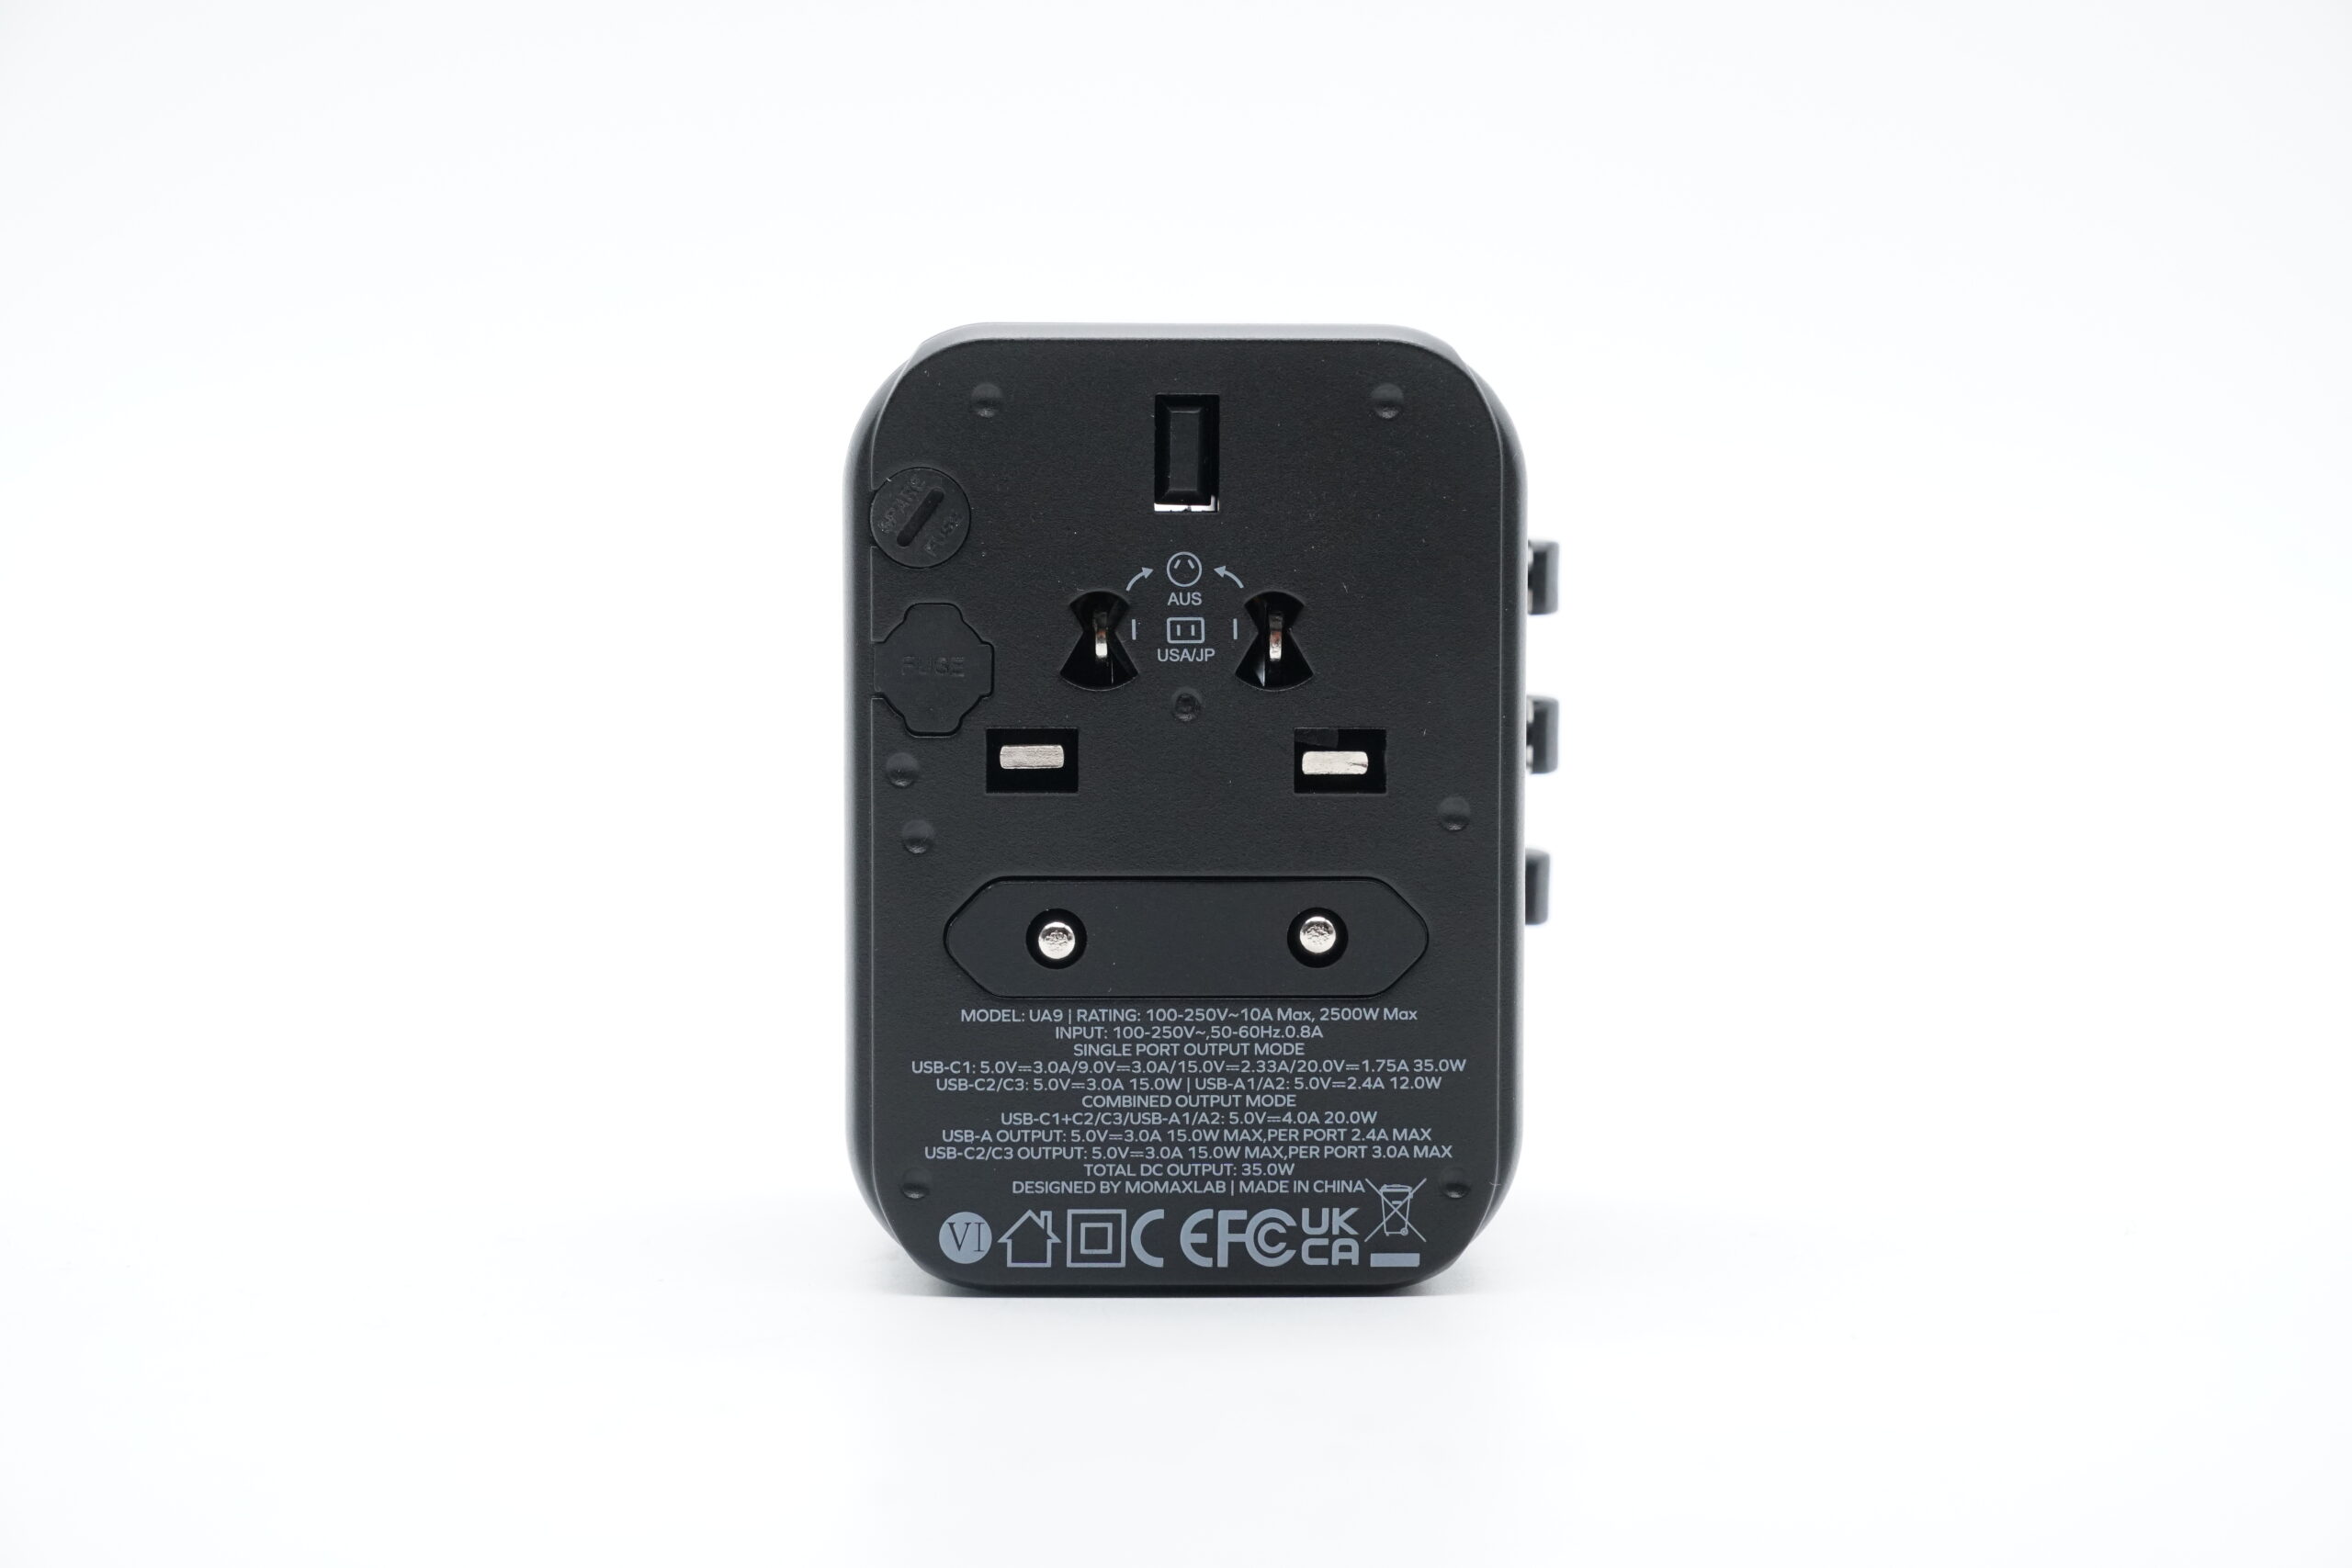 Review of MOMAX 35W PD Travel Power Adapter (U9A)-Chargerlab